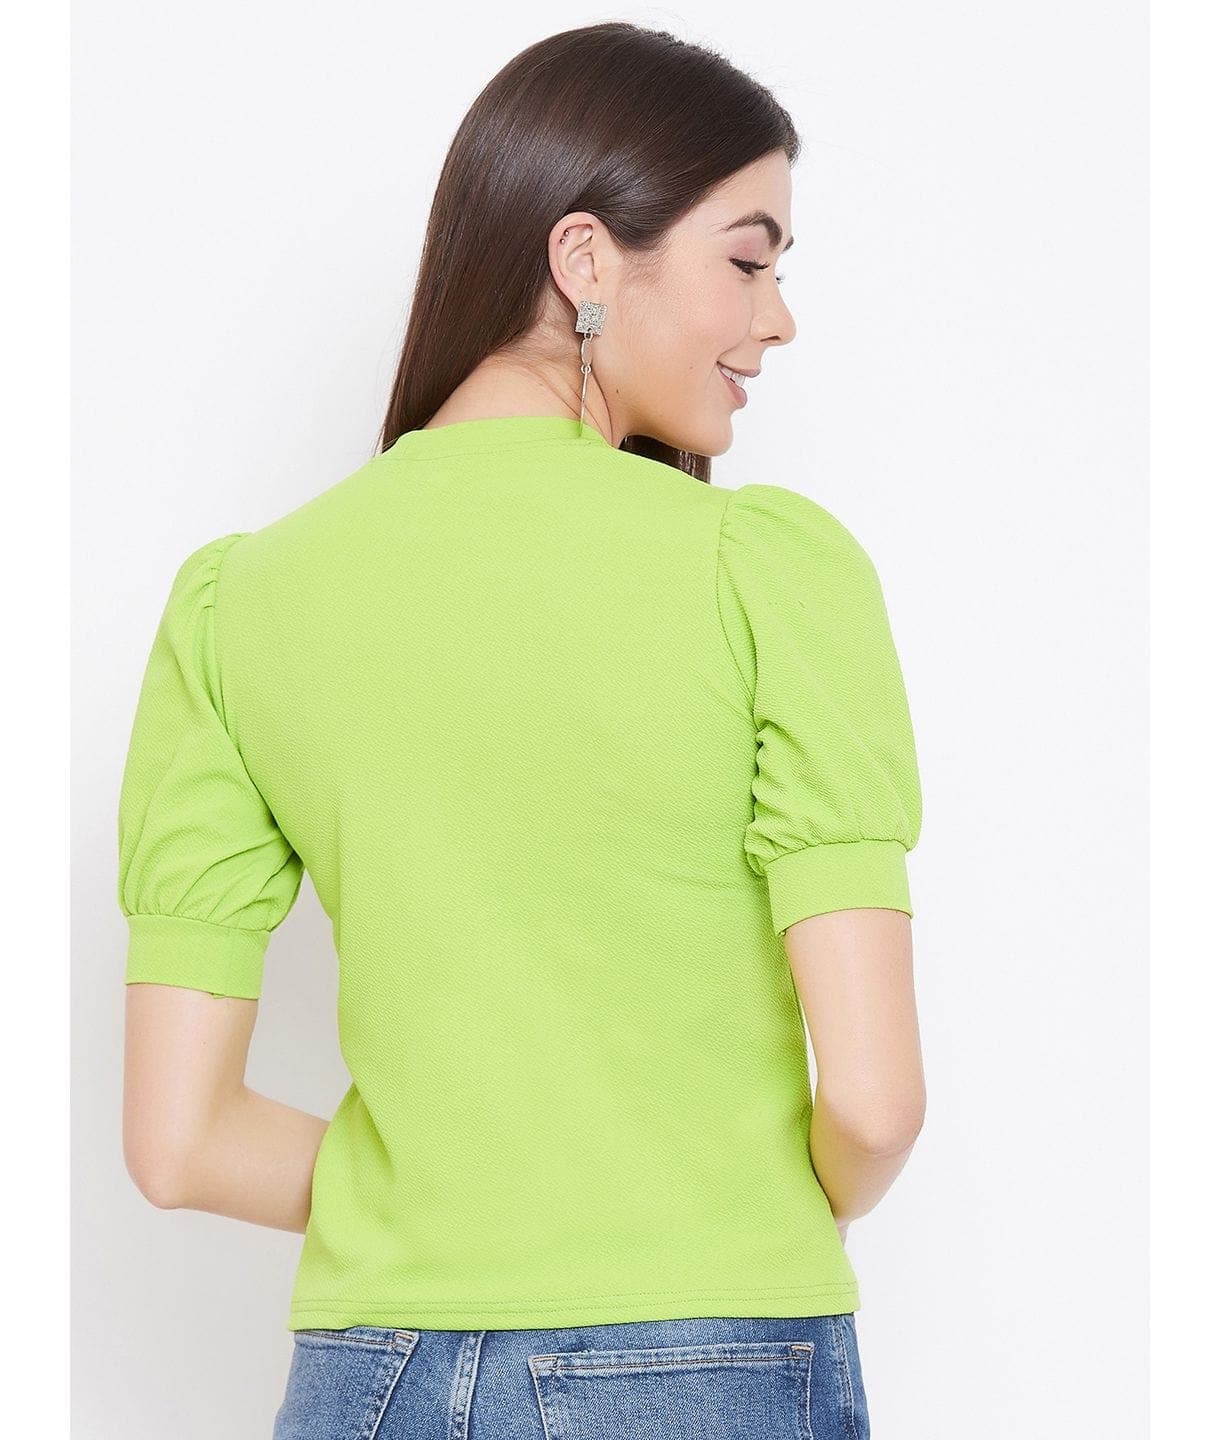 Cotton Stretchable High Neck Top - Uptownie